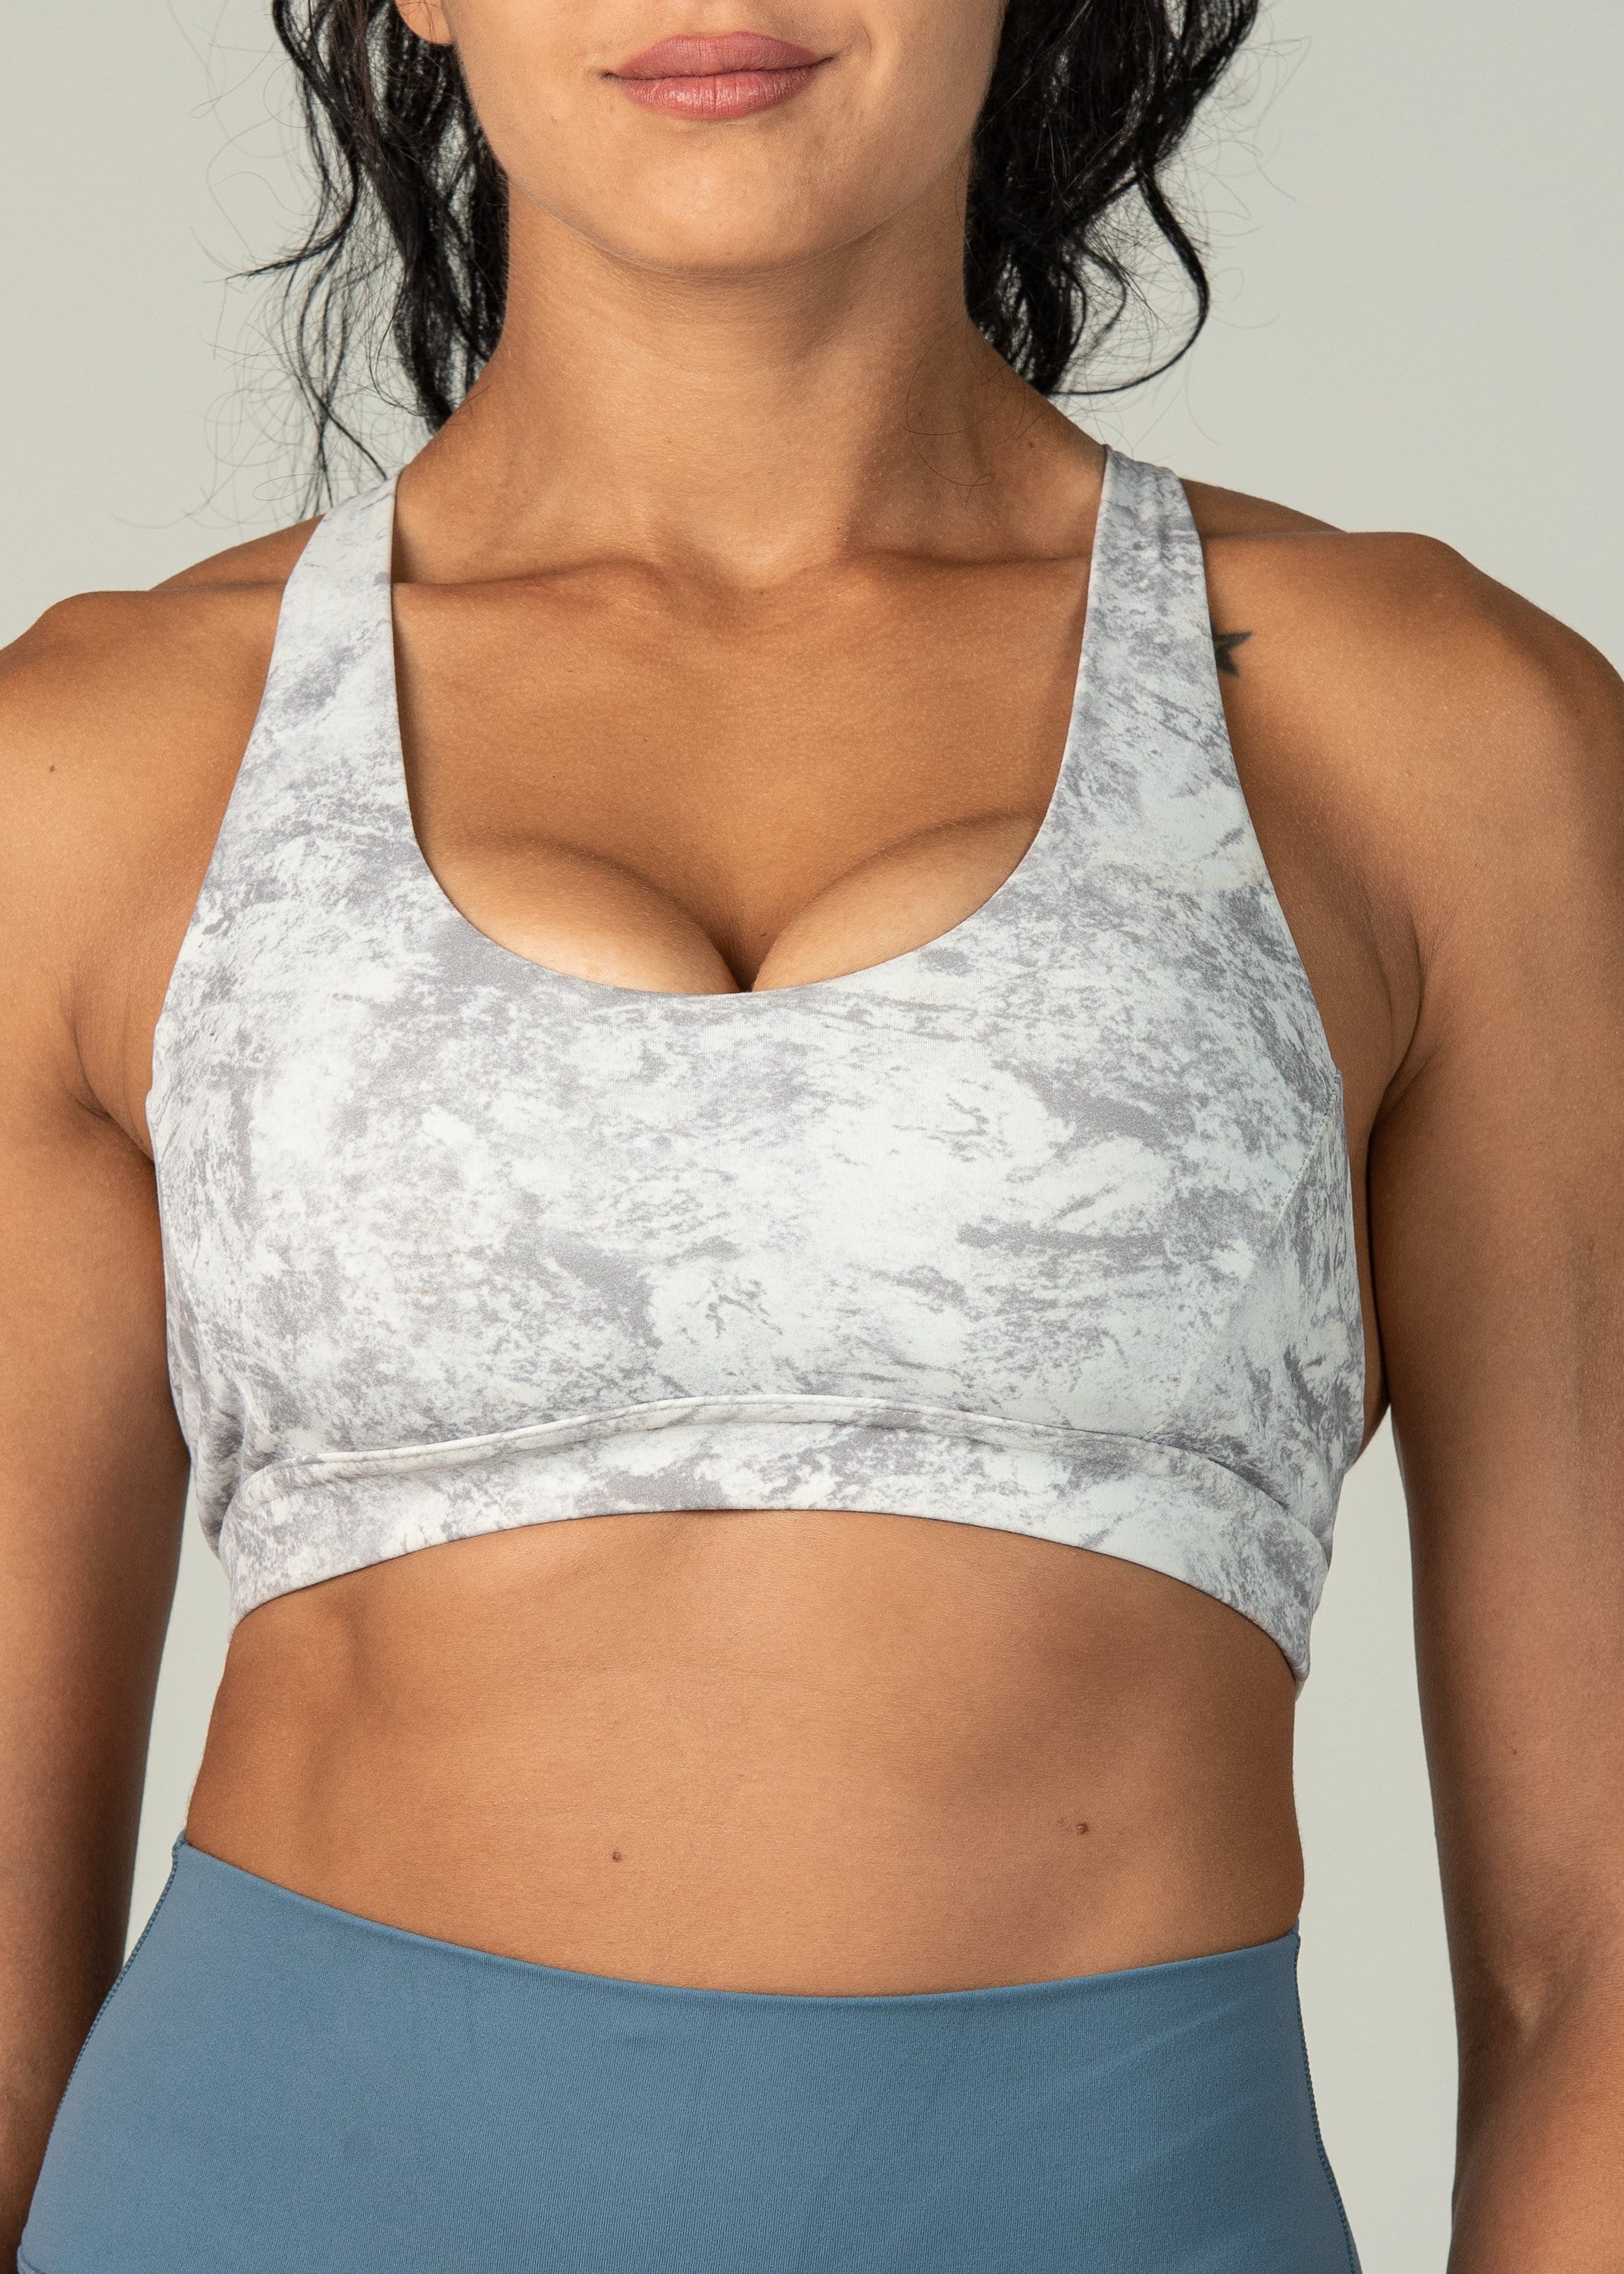 Champion Sports Bra Compression Womens Moderate Support Reflective C Logo  XS-2XL - Pioneer Recycling Services